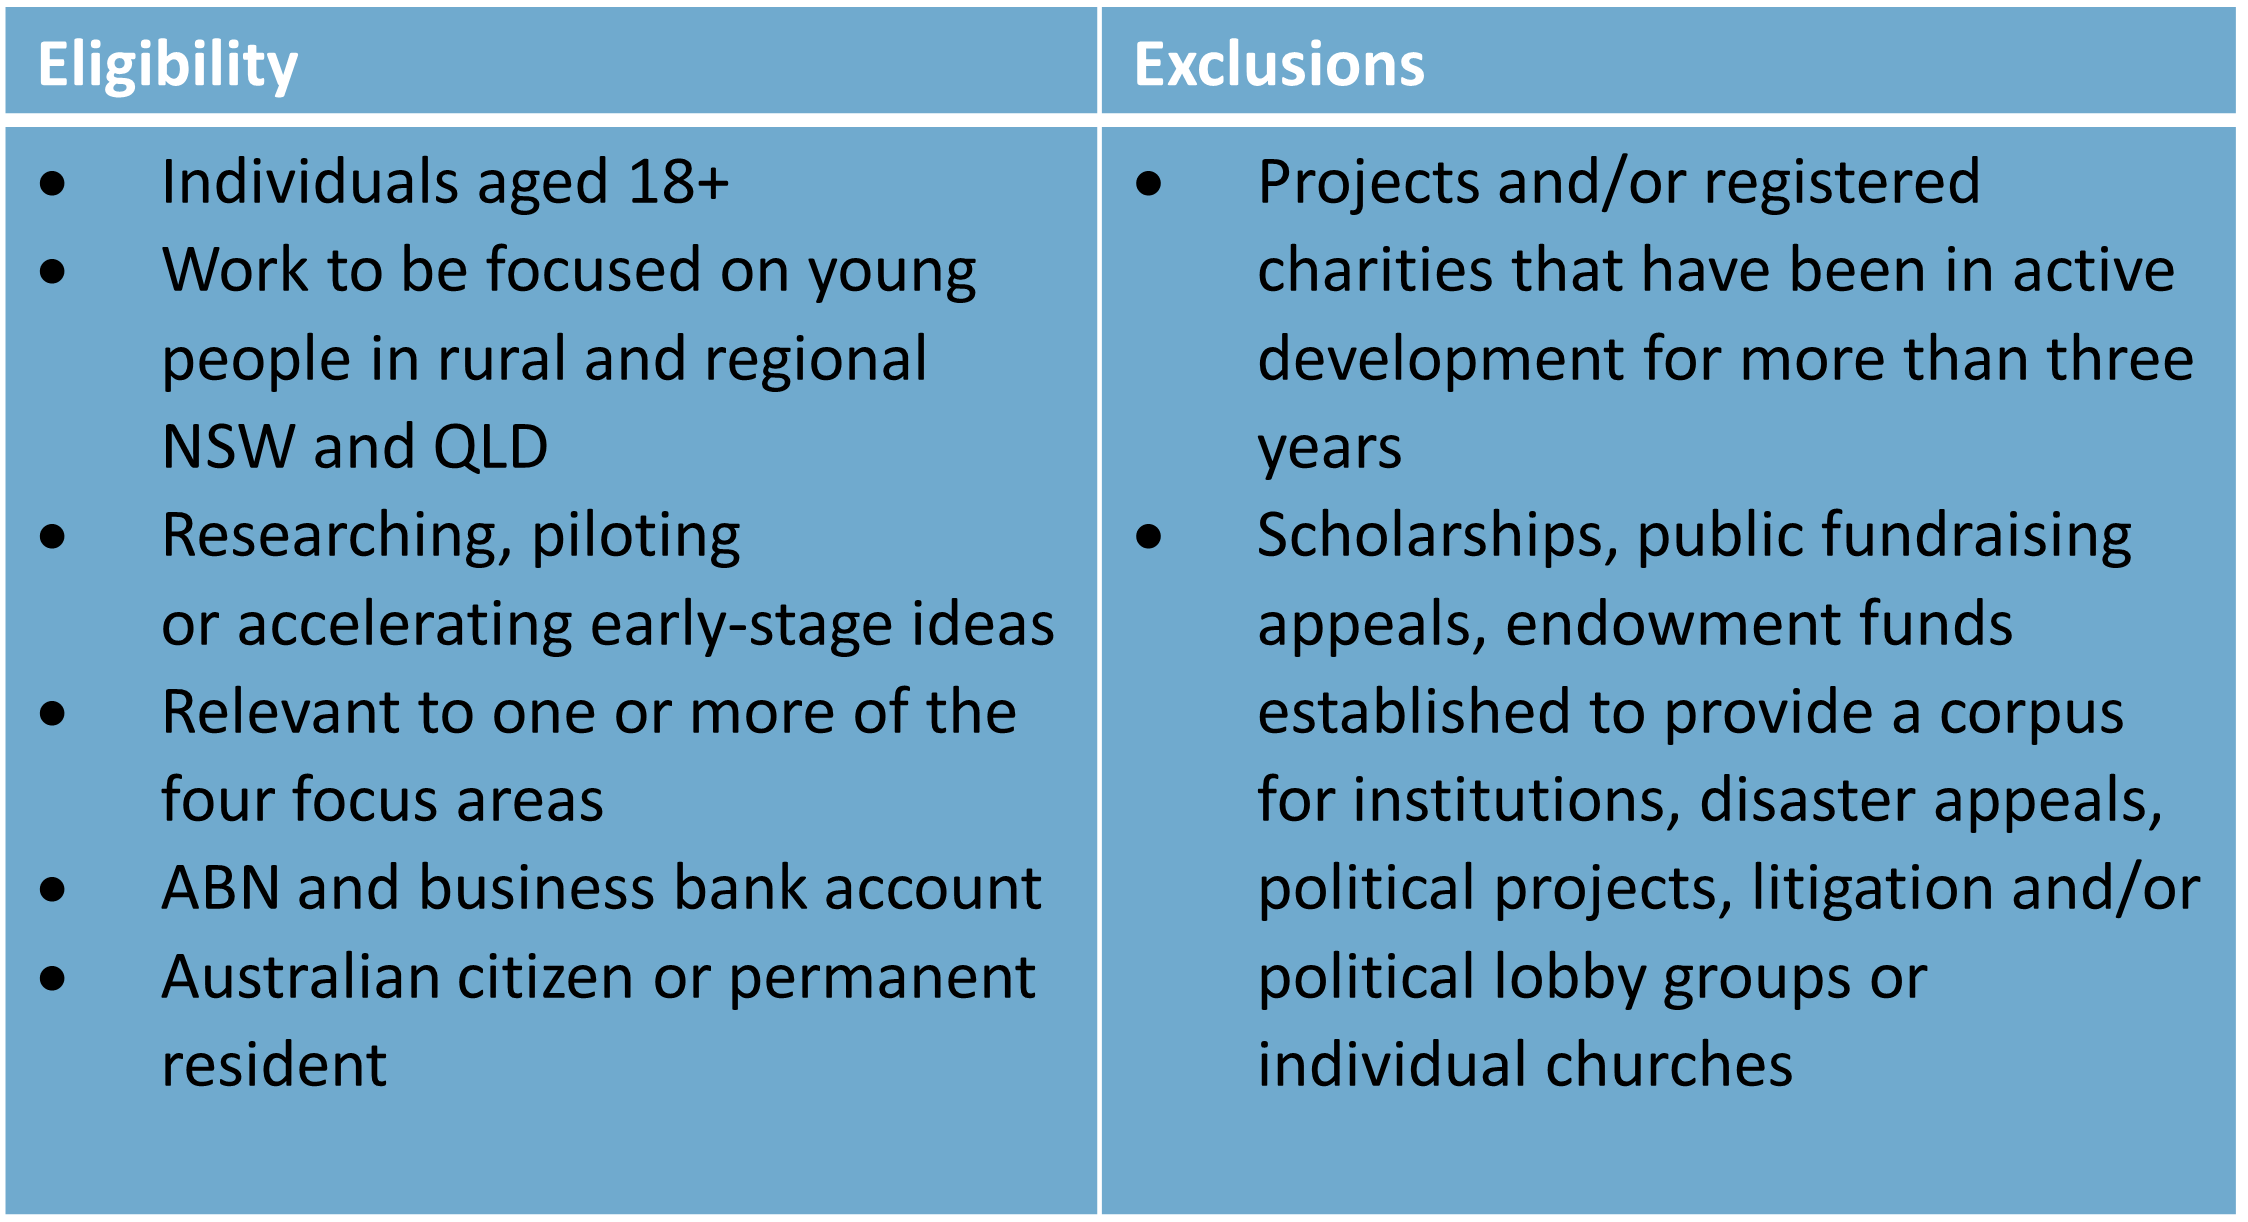 Final eligibility and exclusions criteria